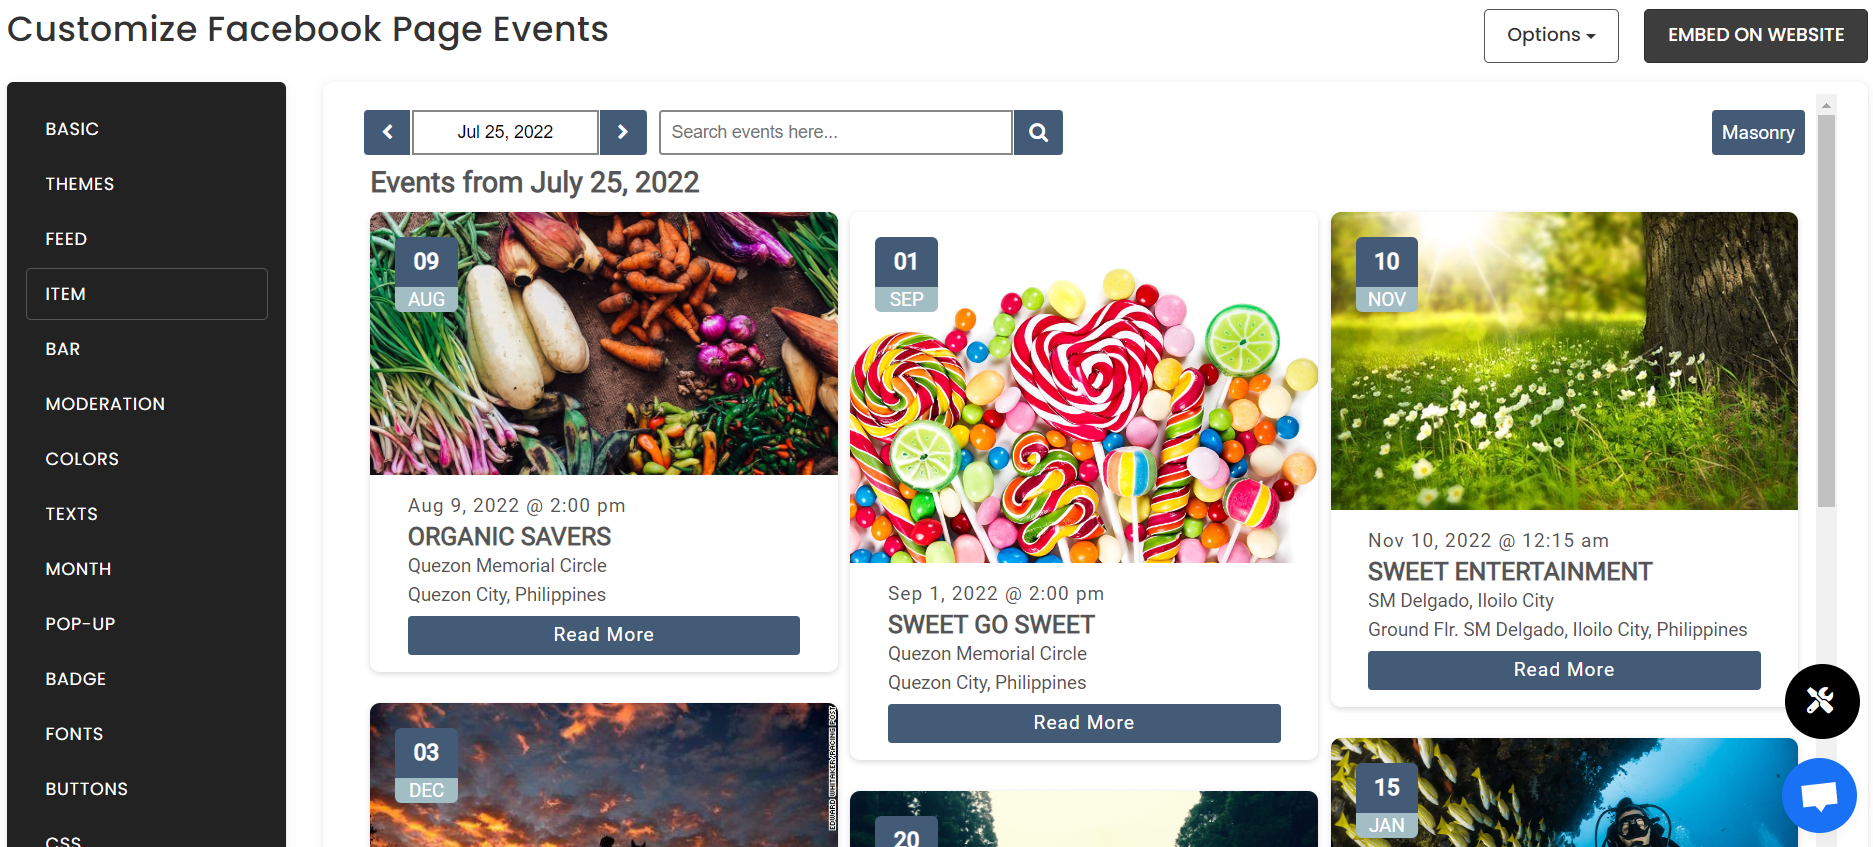 Customize your feed - Free Facebook Page Events Widget For WordPress Website